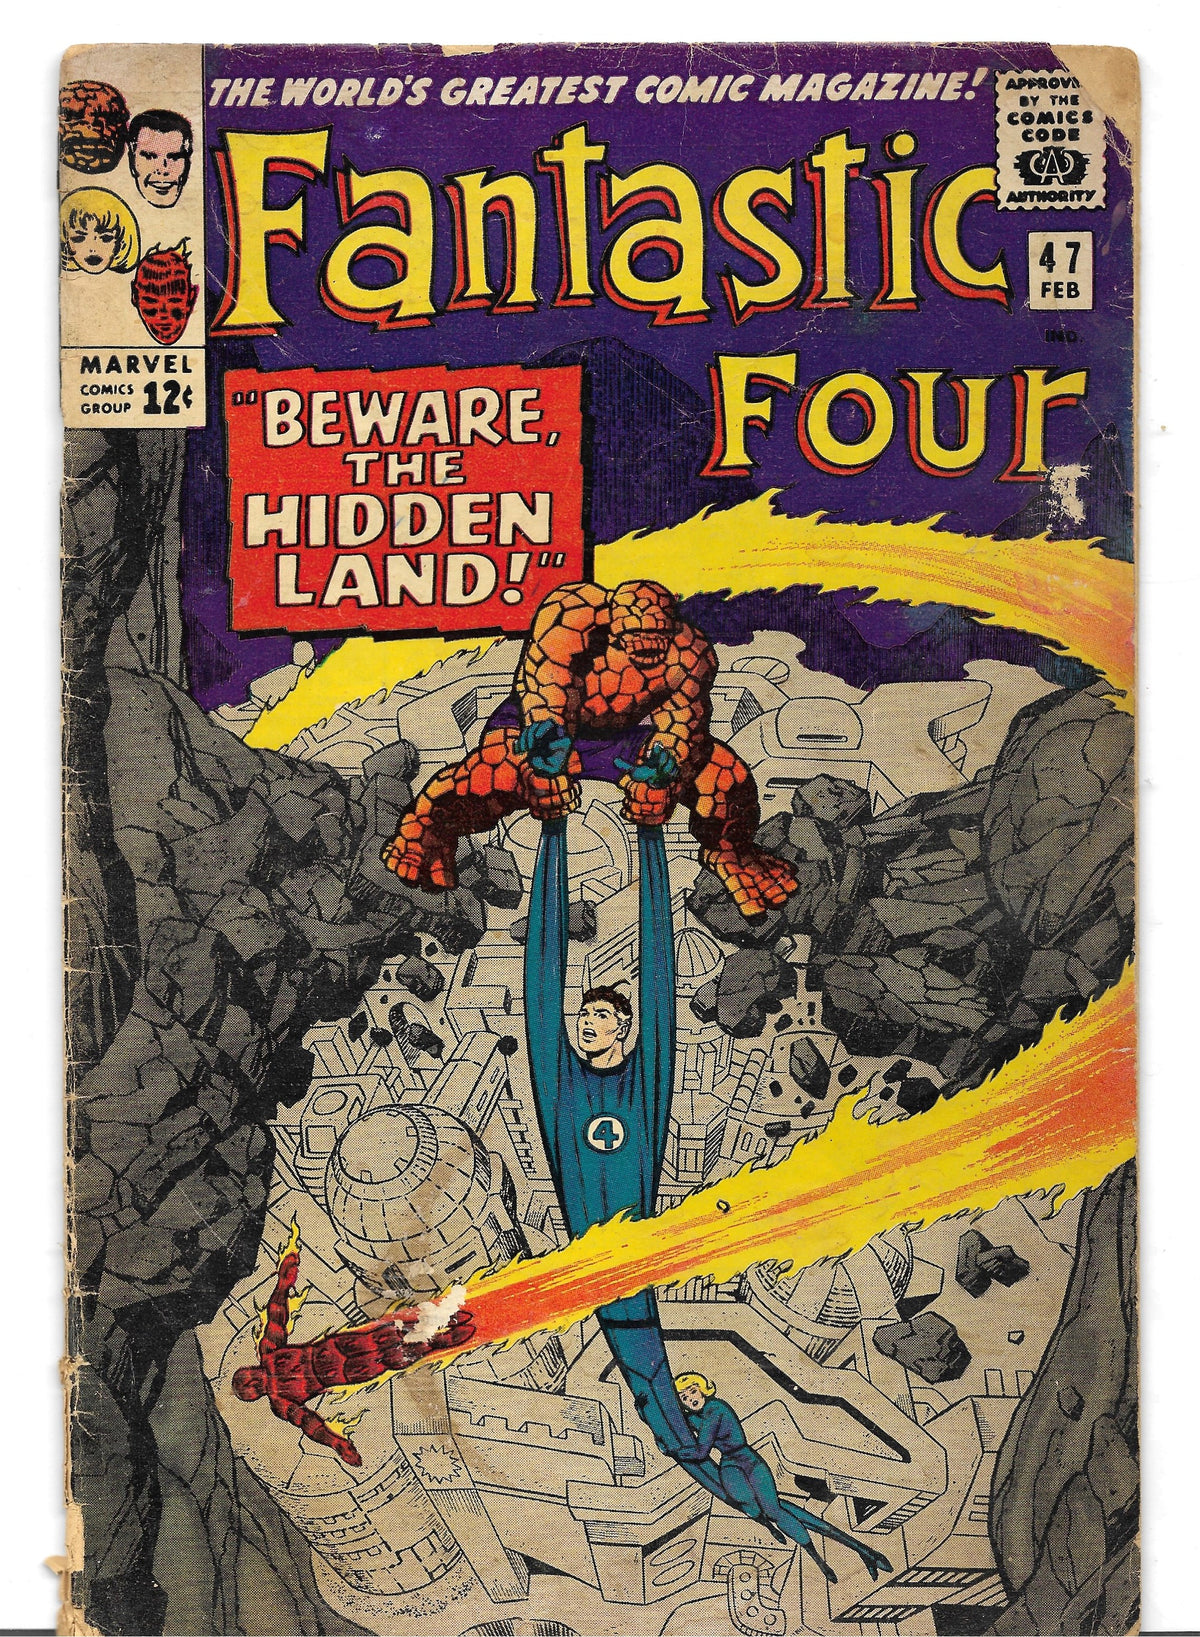 Photo of Fantastic Four, Vol. 1 (1965)  Iss 47 Good - 1st App Maximus Comic sold by Stronghold Collectibles